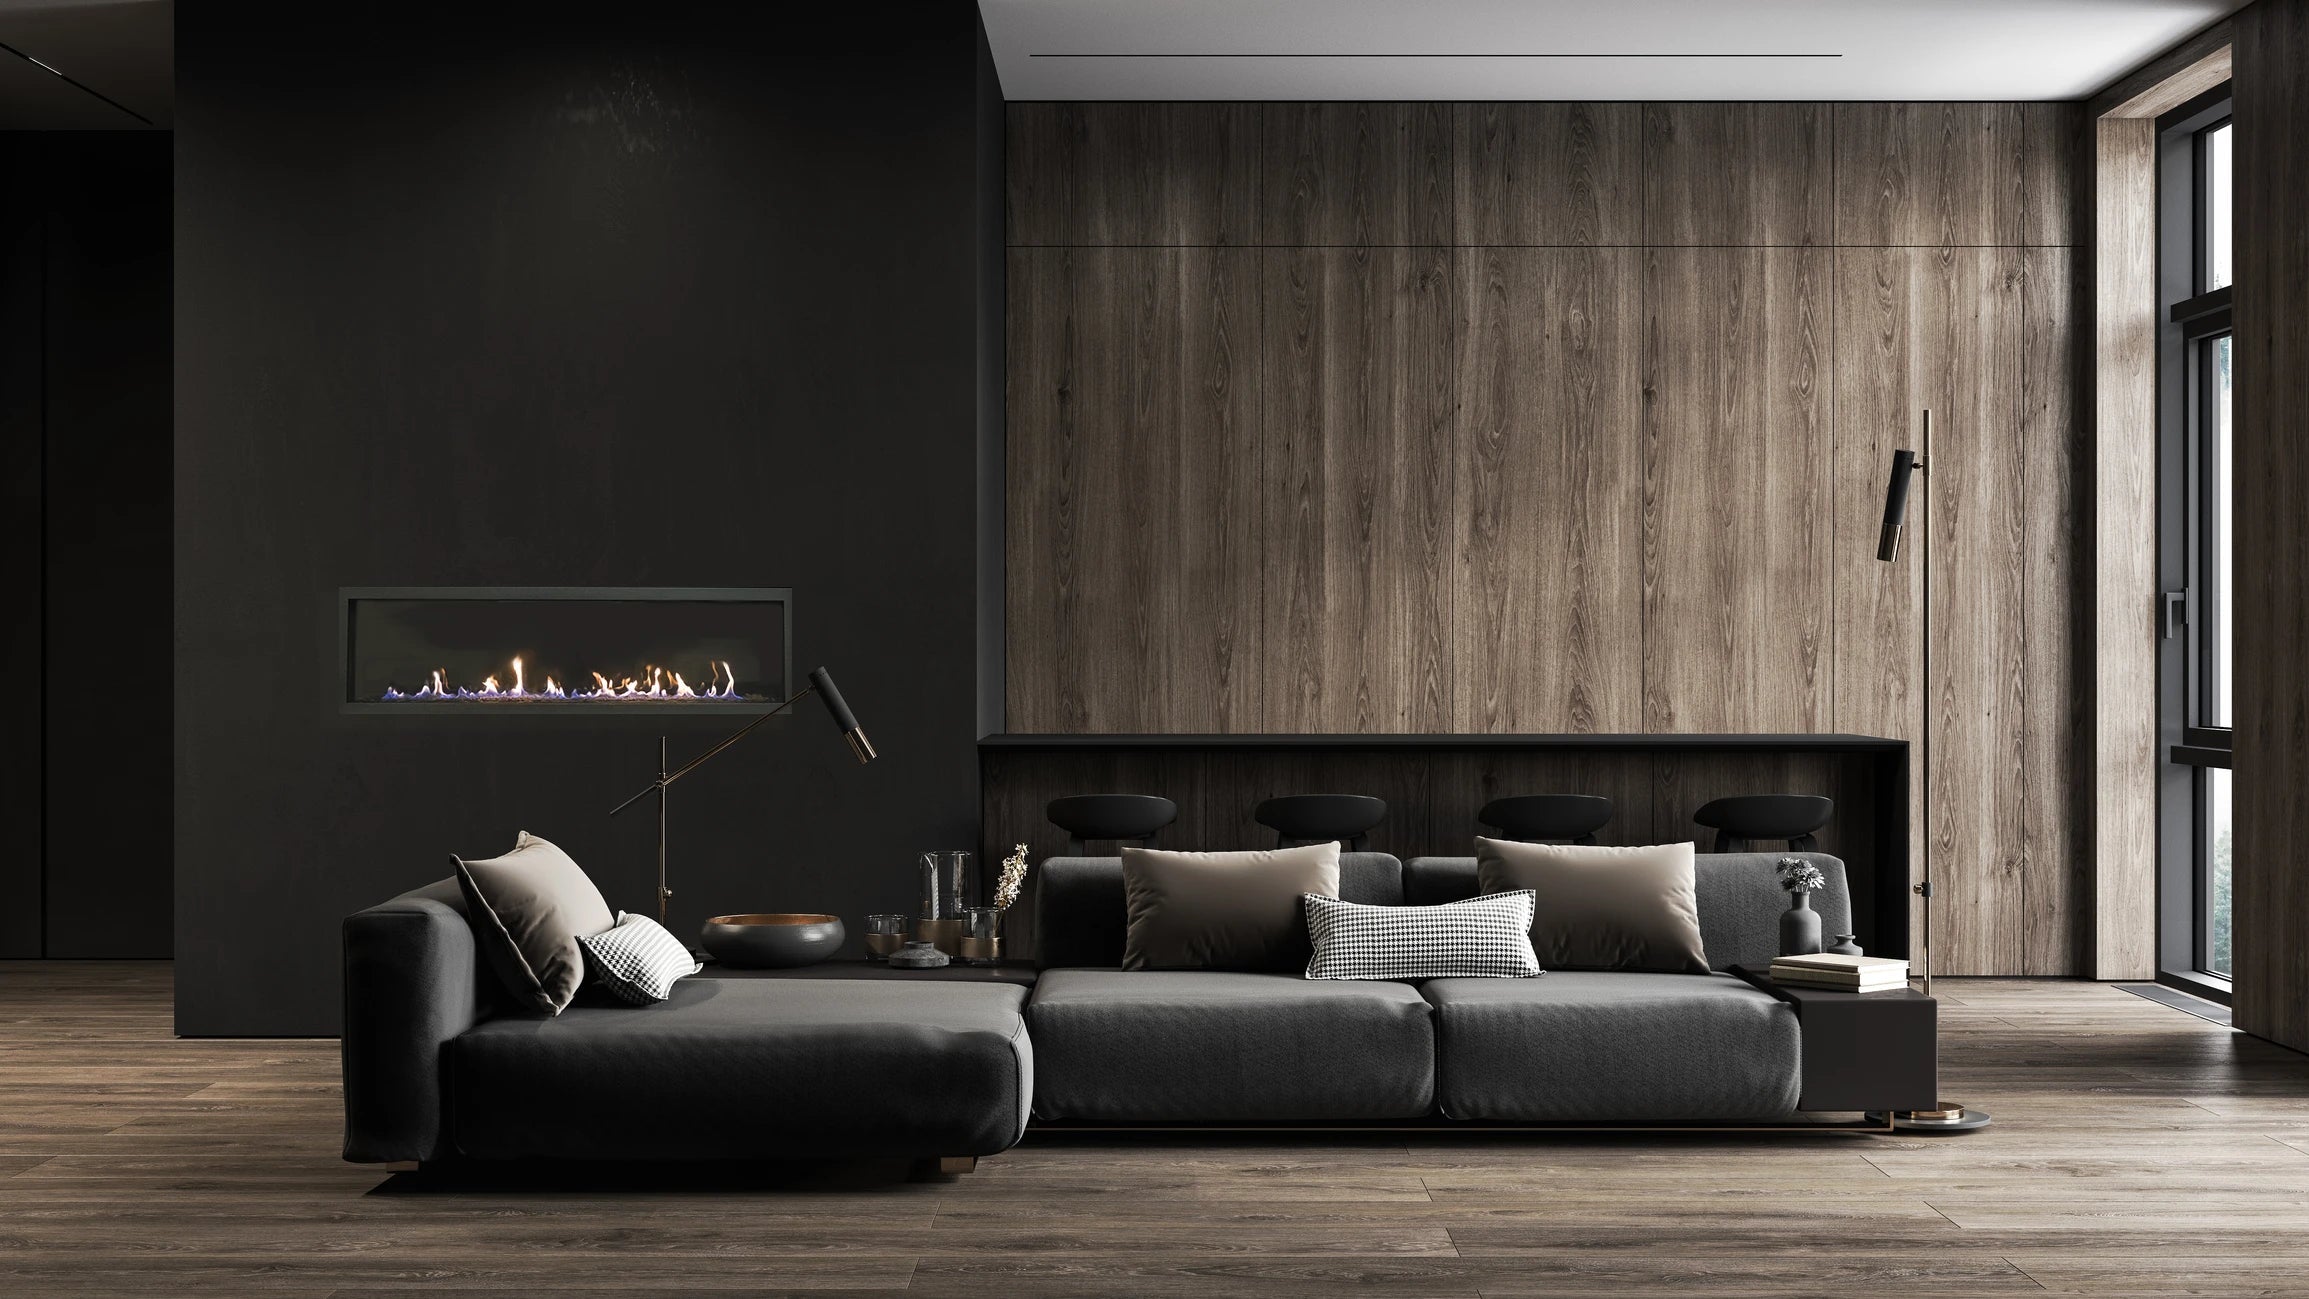 Sierra Flame Austin 65" Direct Vent Linear Gas Fireplace- Lifestyle Minimalist Living Room